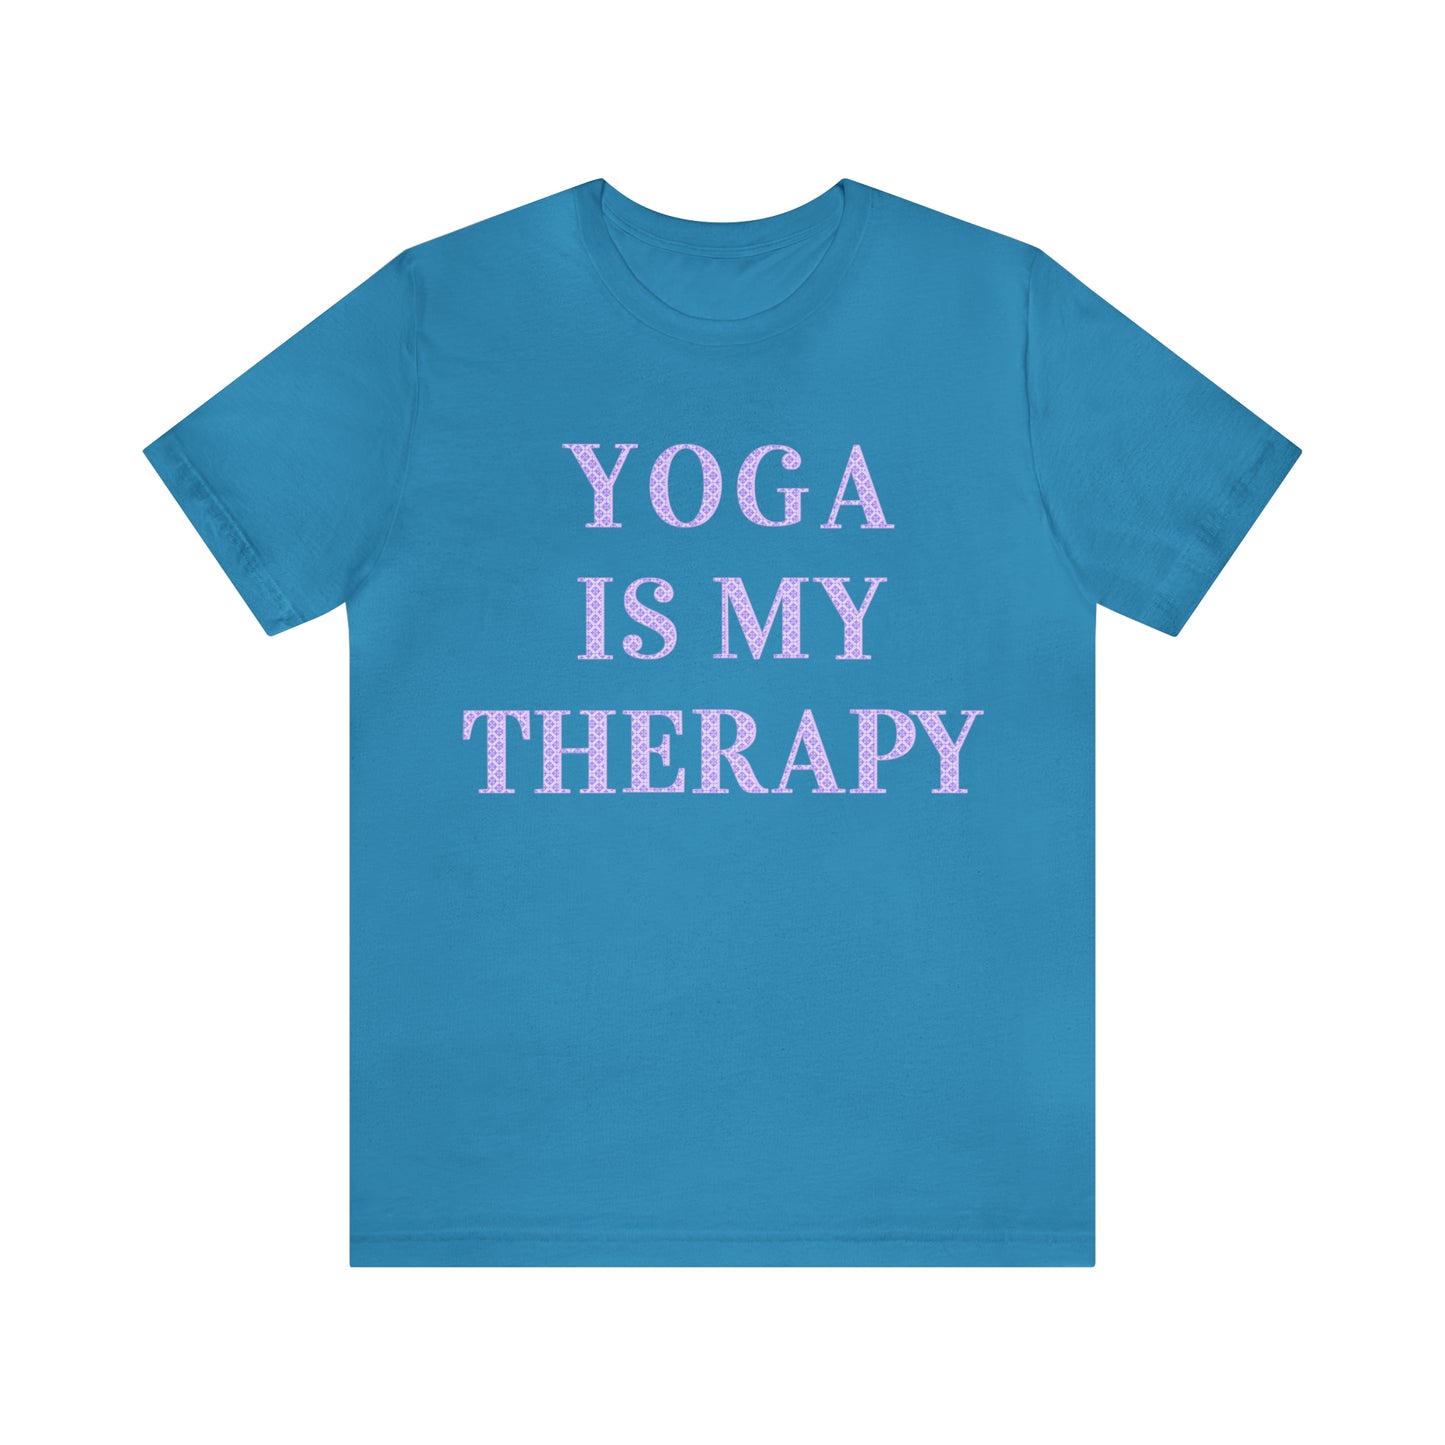 Yoga Is My Therapy- Adult, Regular Fit, Soft Cotton, Full Size Image, T-shirt